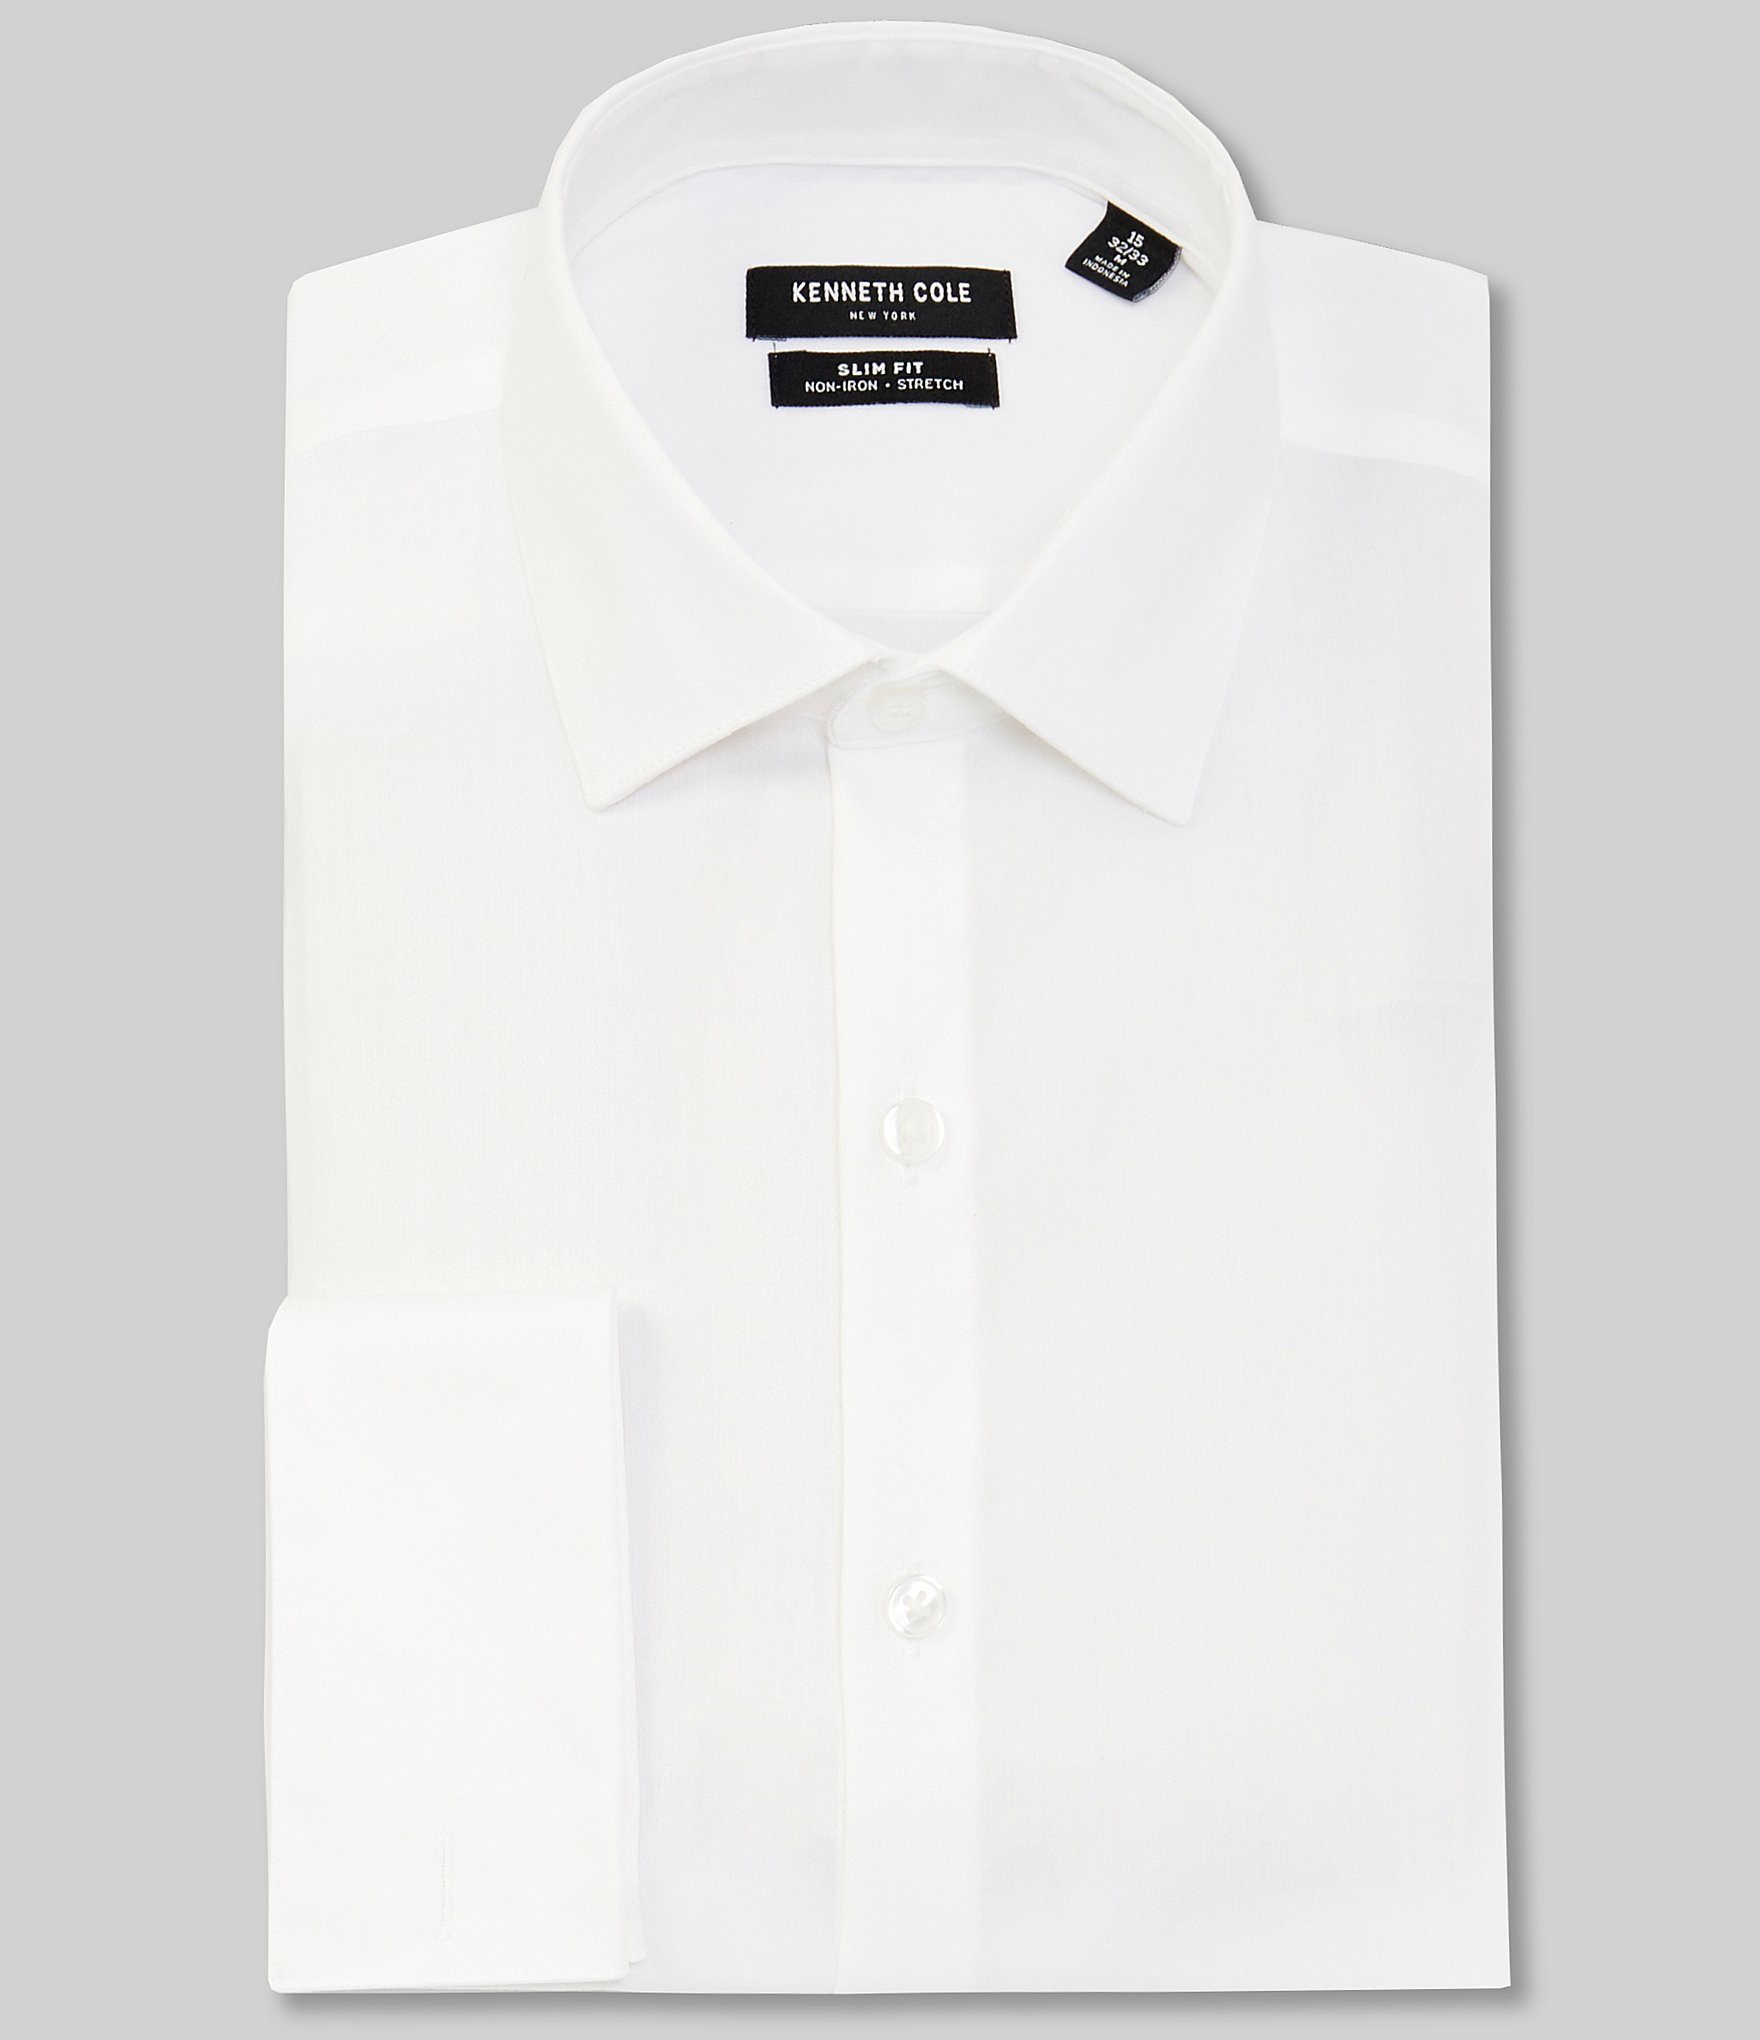 $275 Michelsons Men Slim-Fit French-Cuff White Long-Sleeve Dress Shirt 15 34/35 